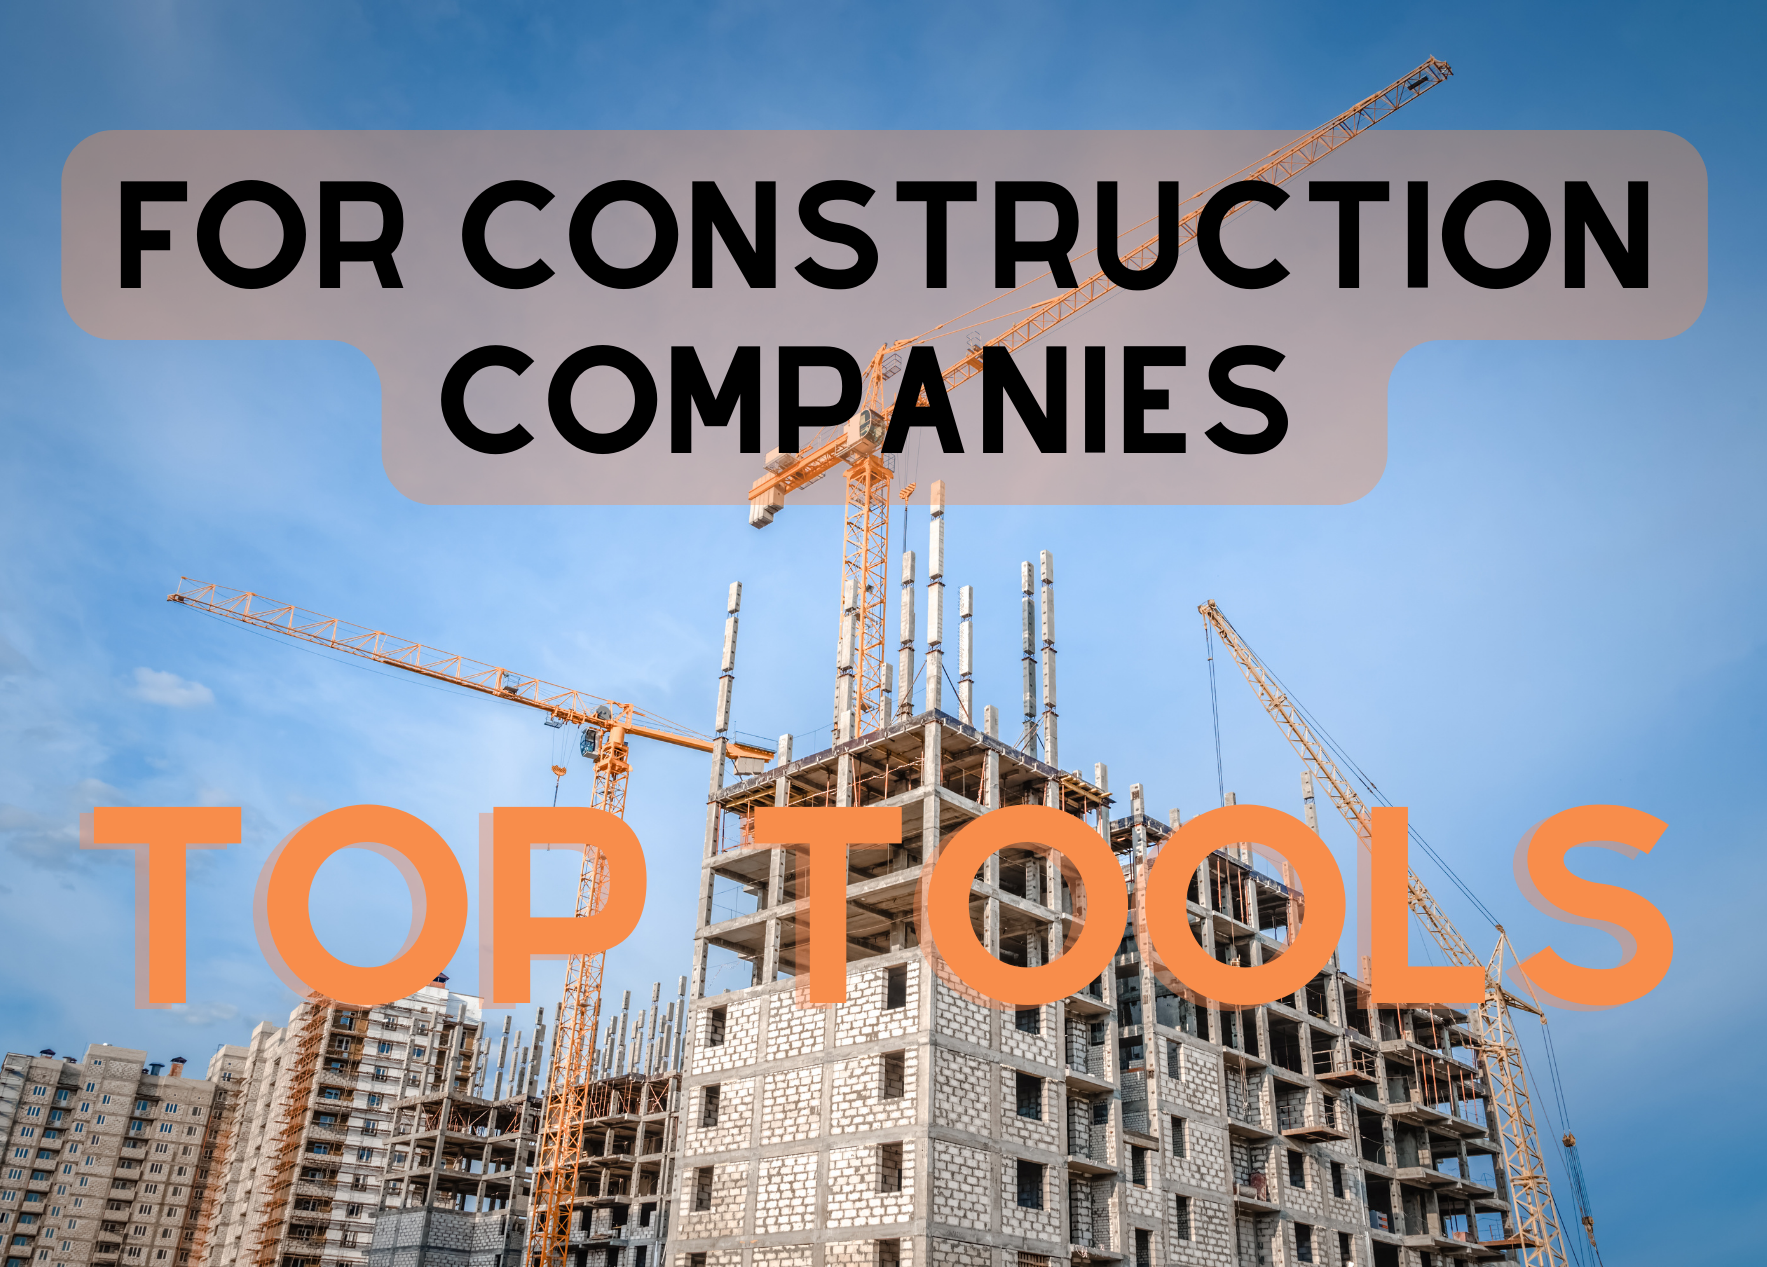 If you run a construction company, you might need some of these amazing tools to help your business.